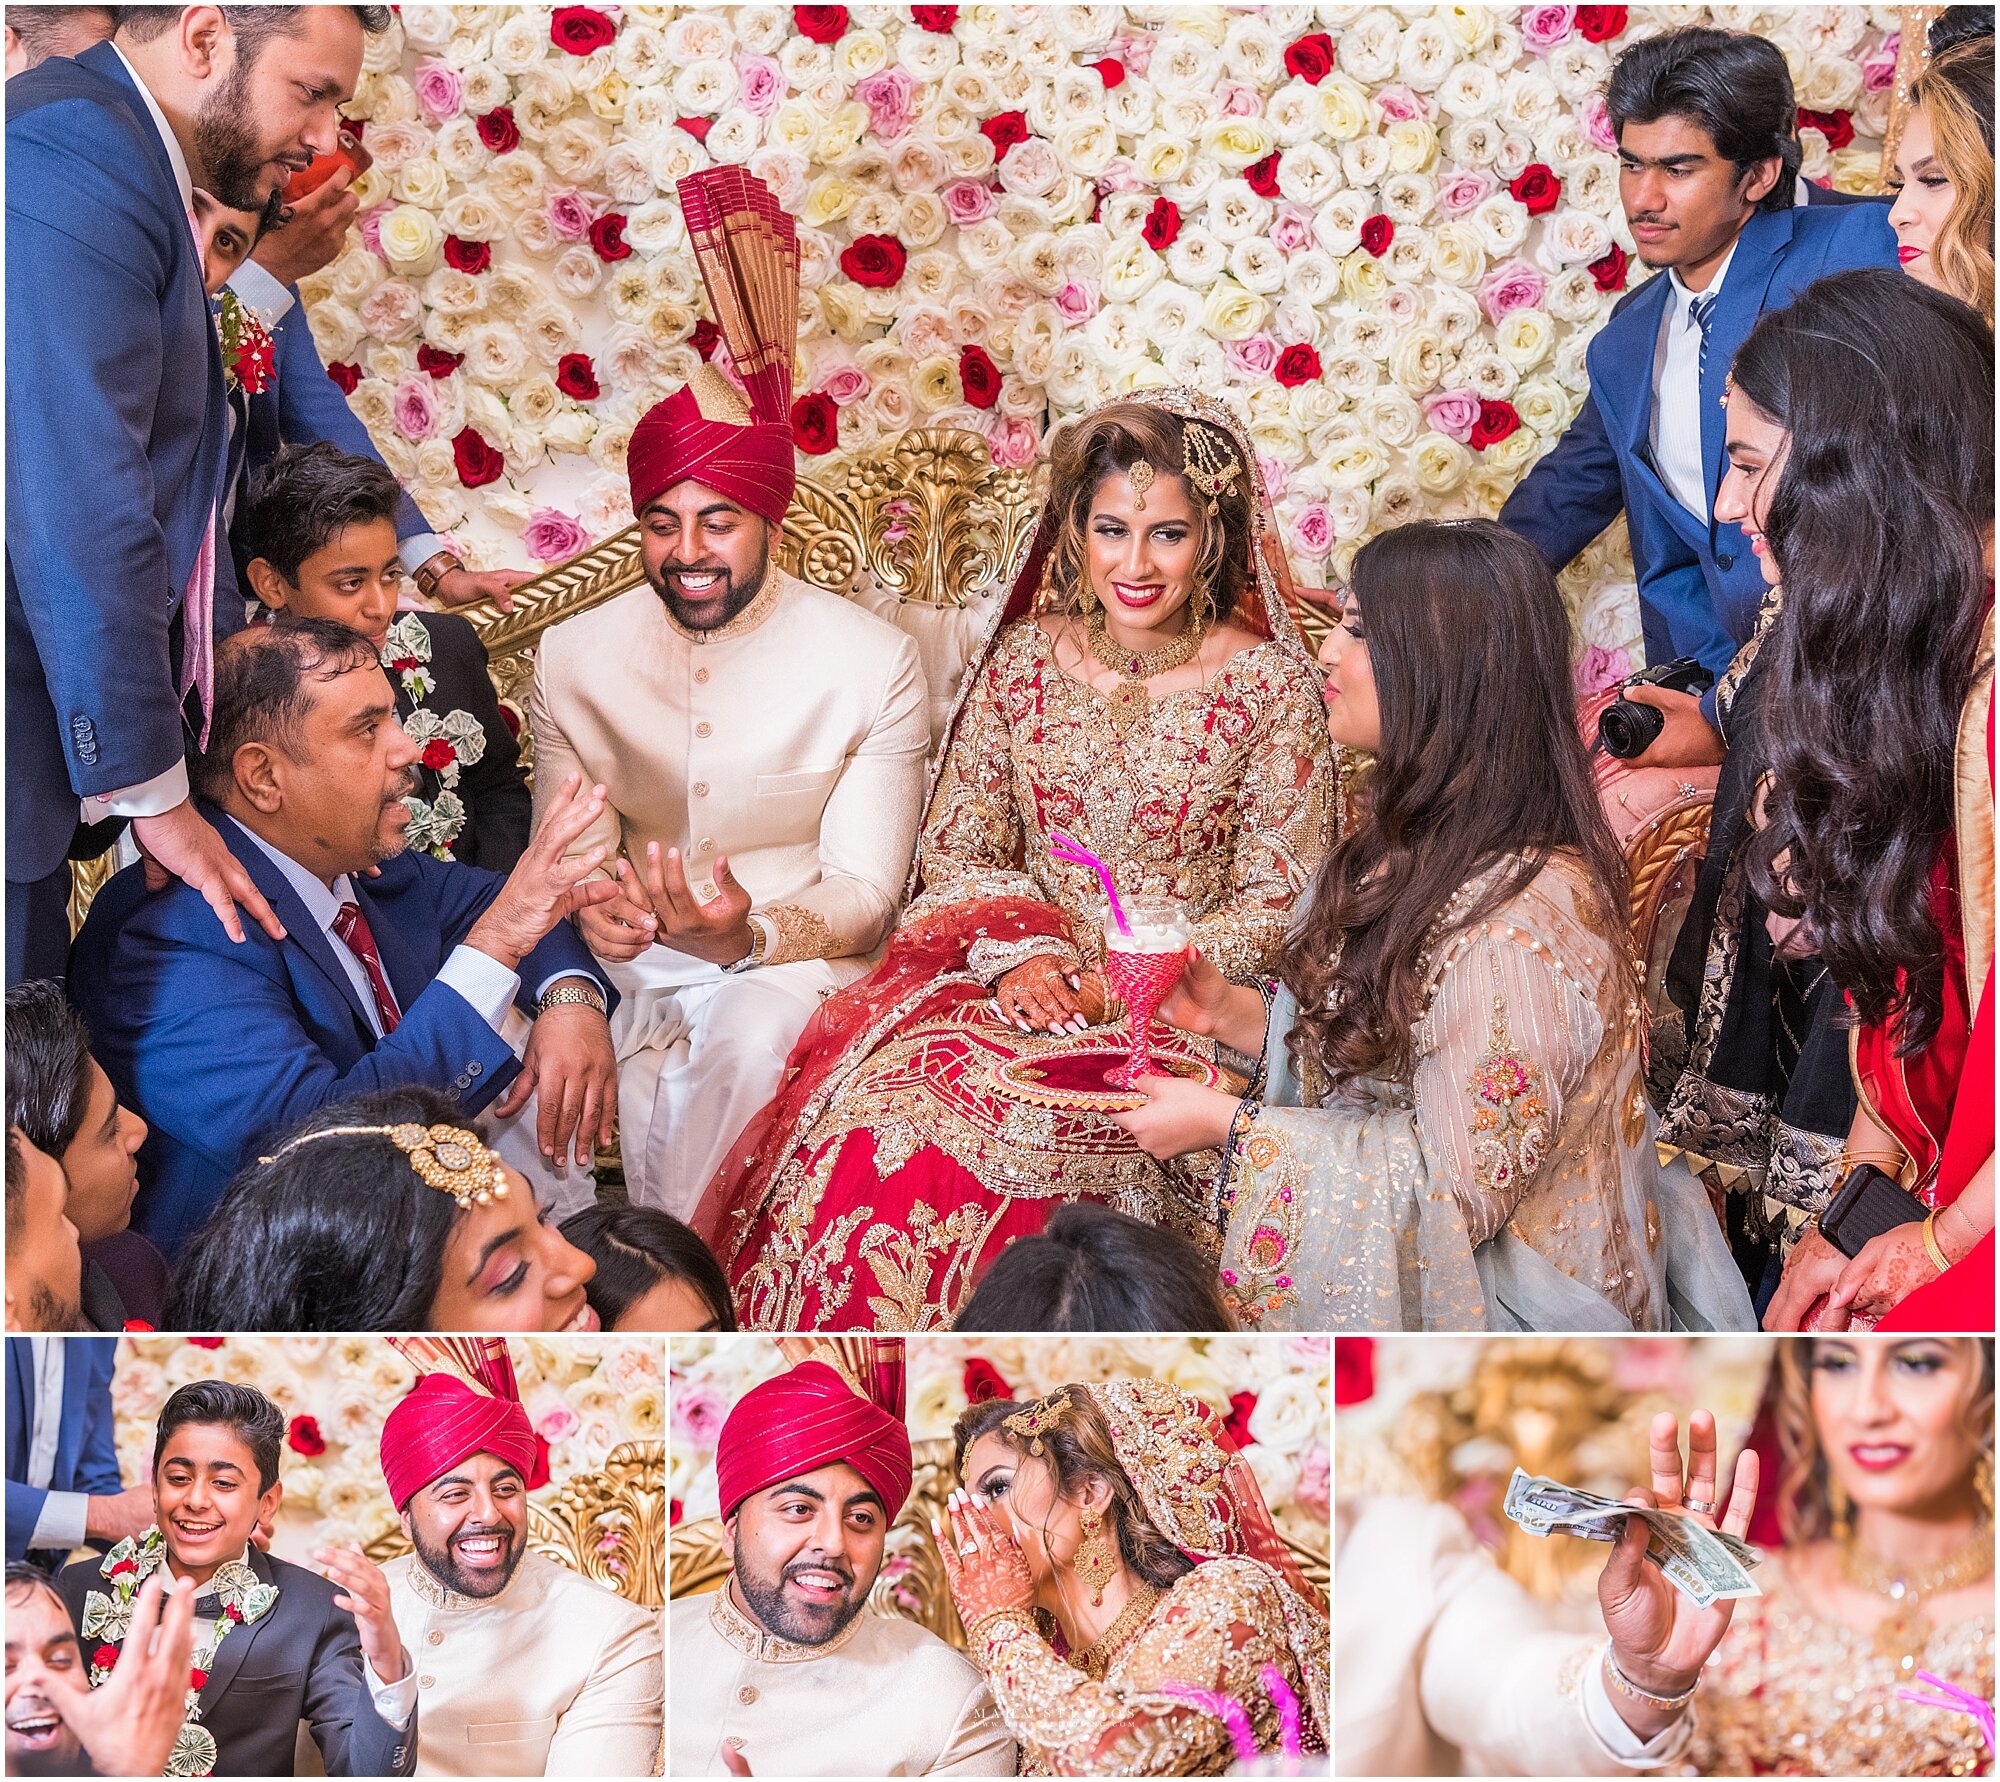 The “dhood pilai “ rasam is another fun tradition in pakistani weddings where the bride’s family demands money from the groom. Another opportunity to make some money at a south asian wedding event!